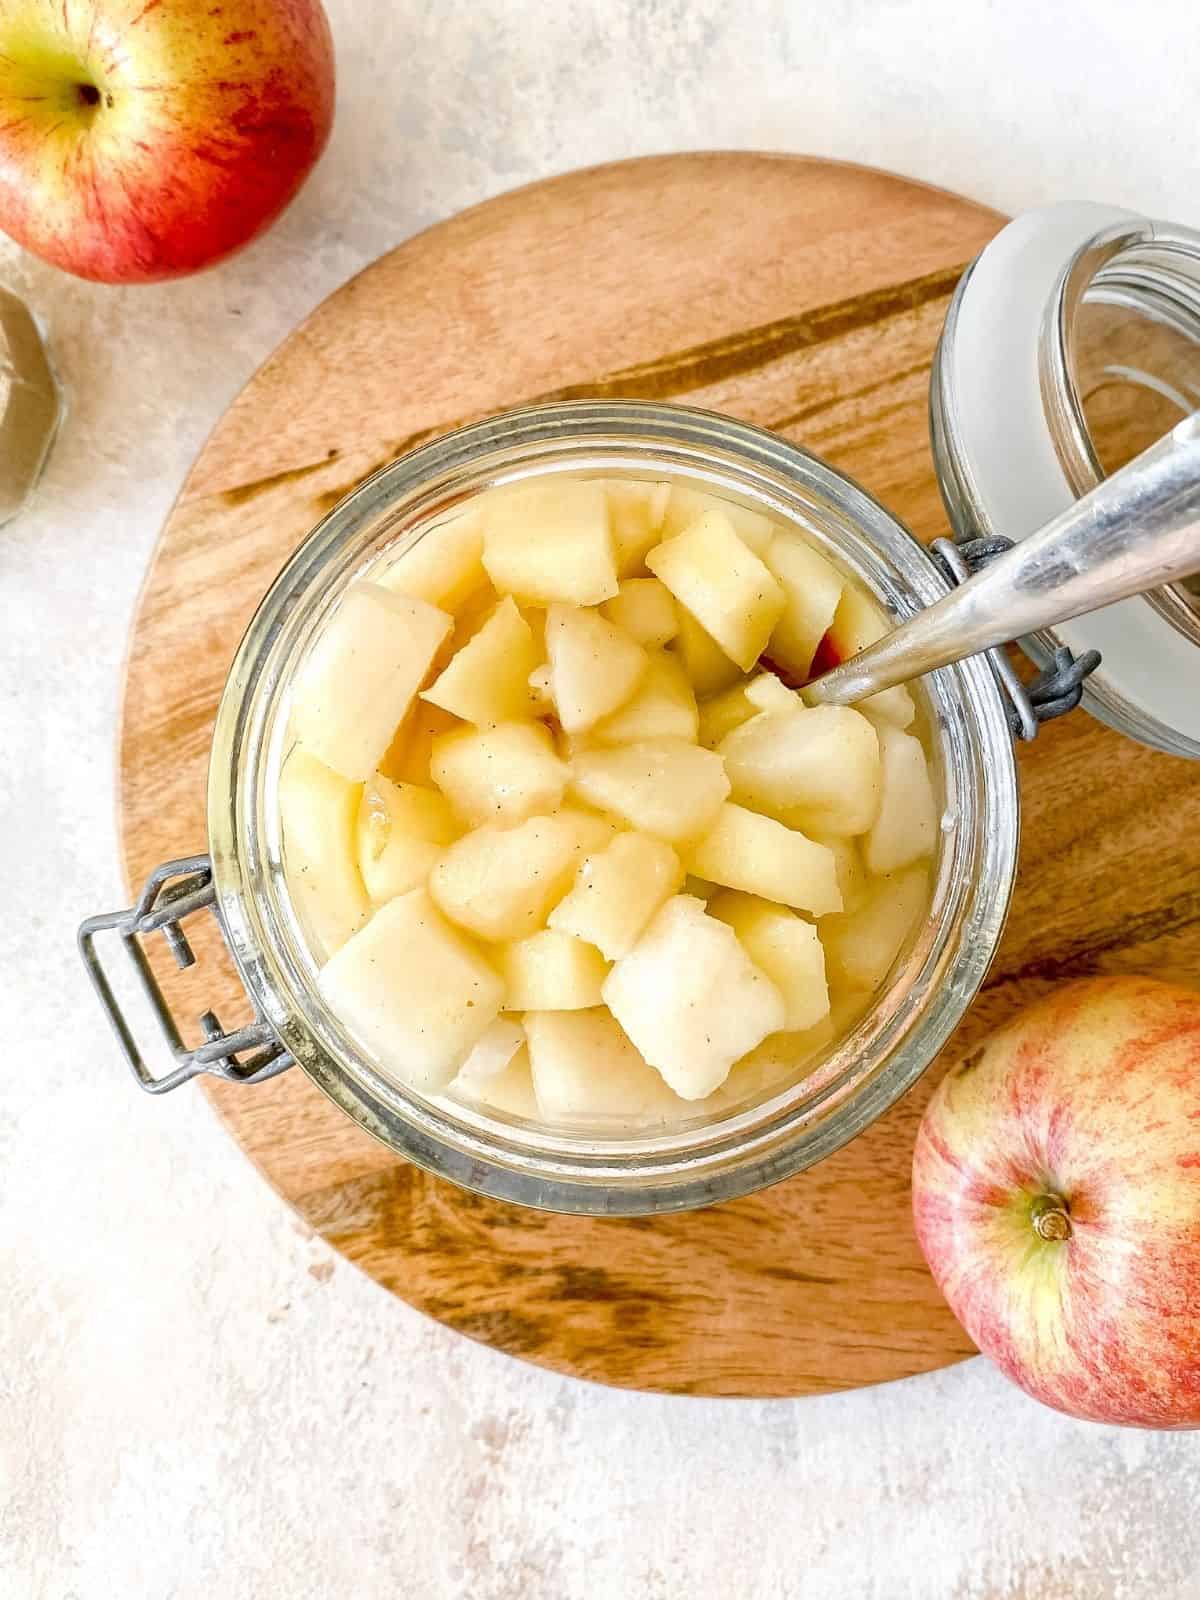 Apple and pear compote in a glass jar with a spoon.